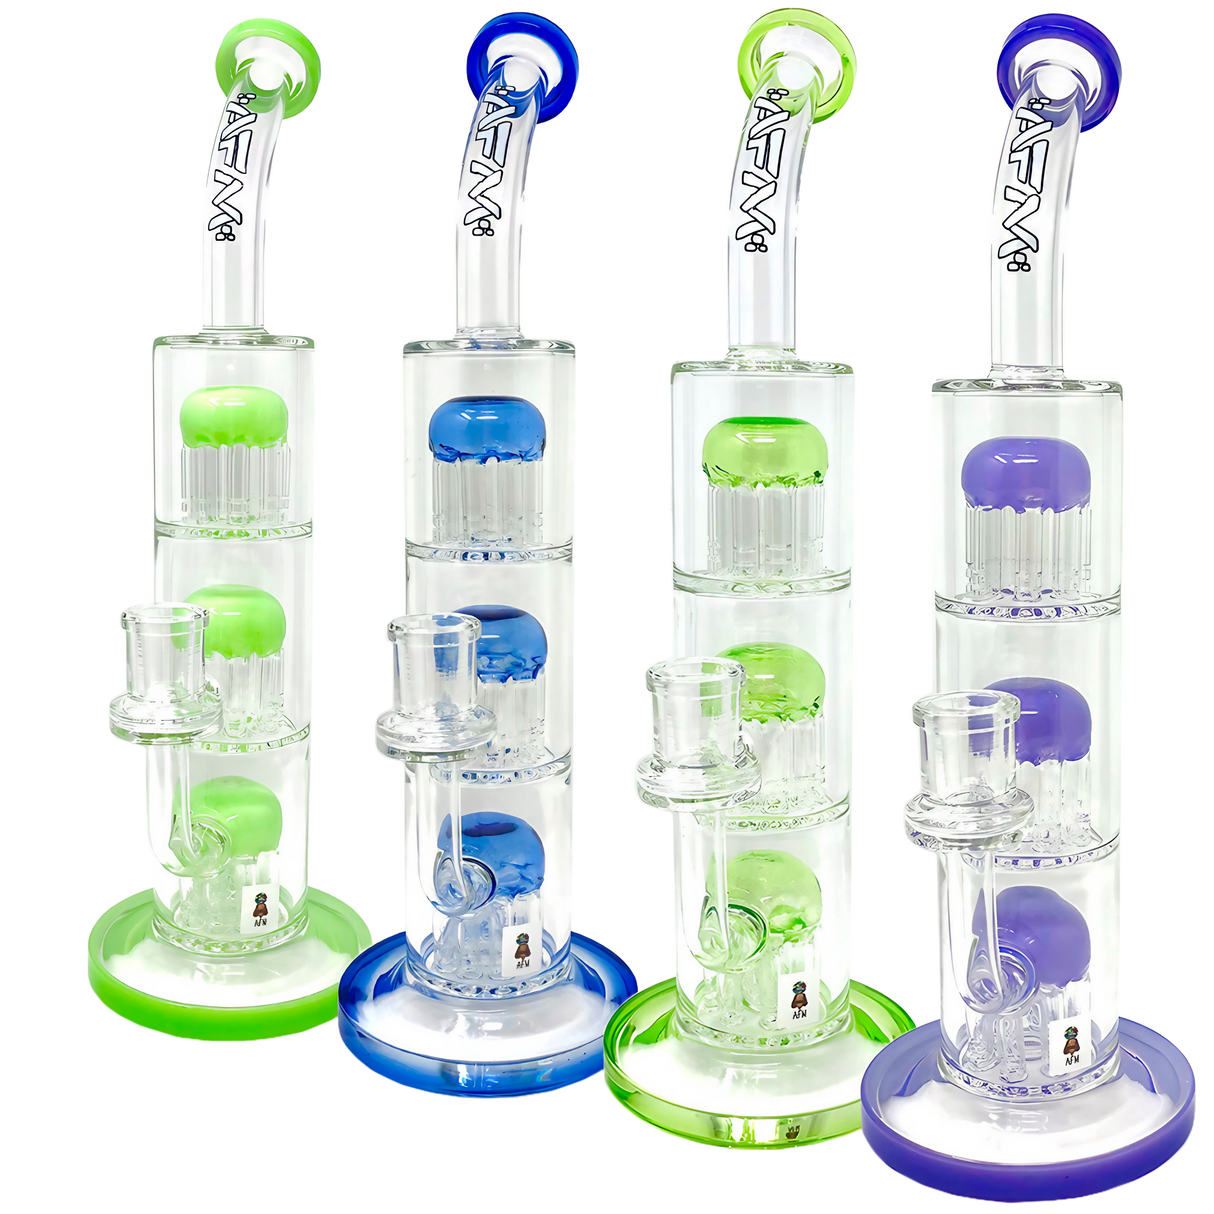 AFM The Third Arm 11.5" bongs with tree percolator, glass on glass joint, in green, blue, and purple variants